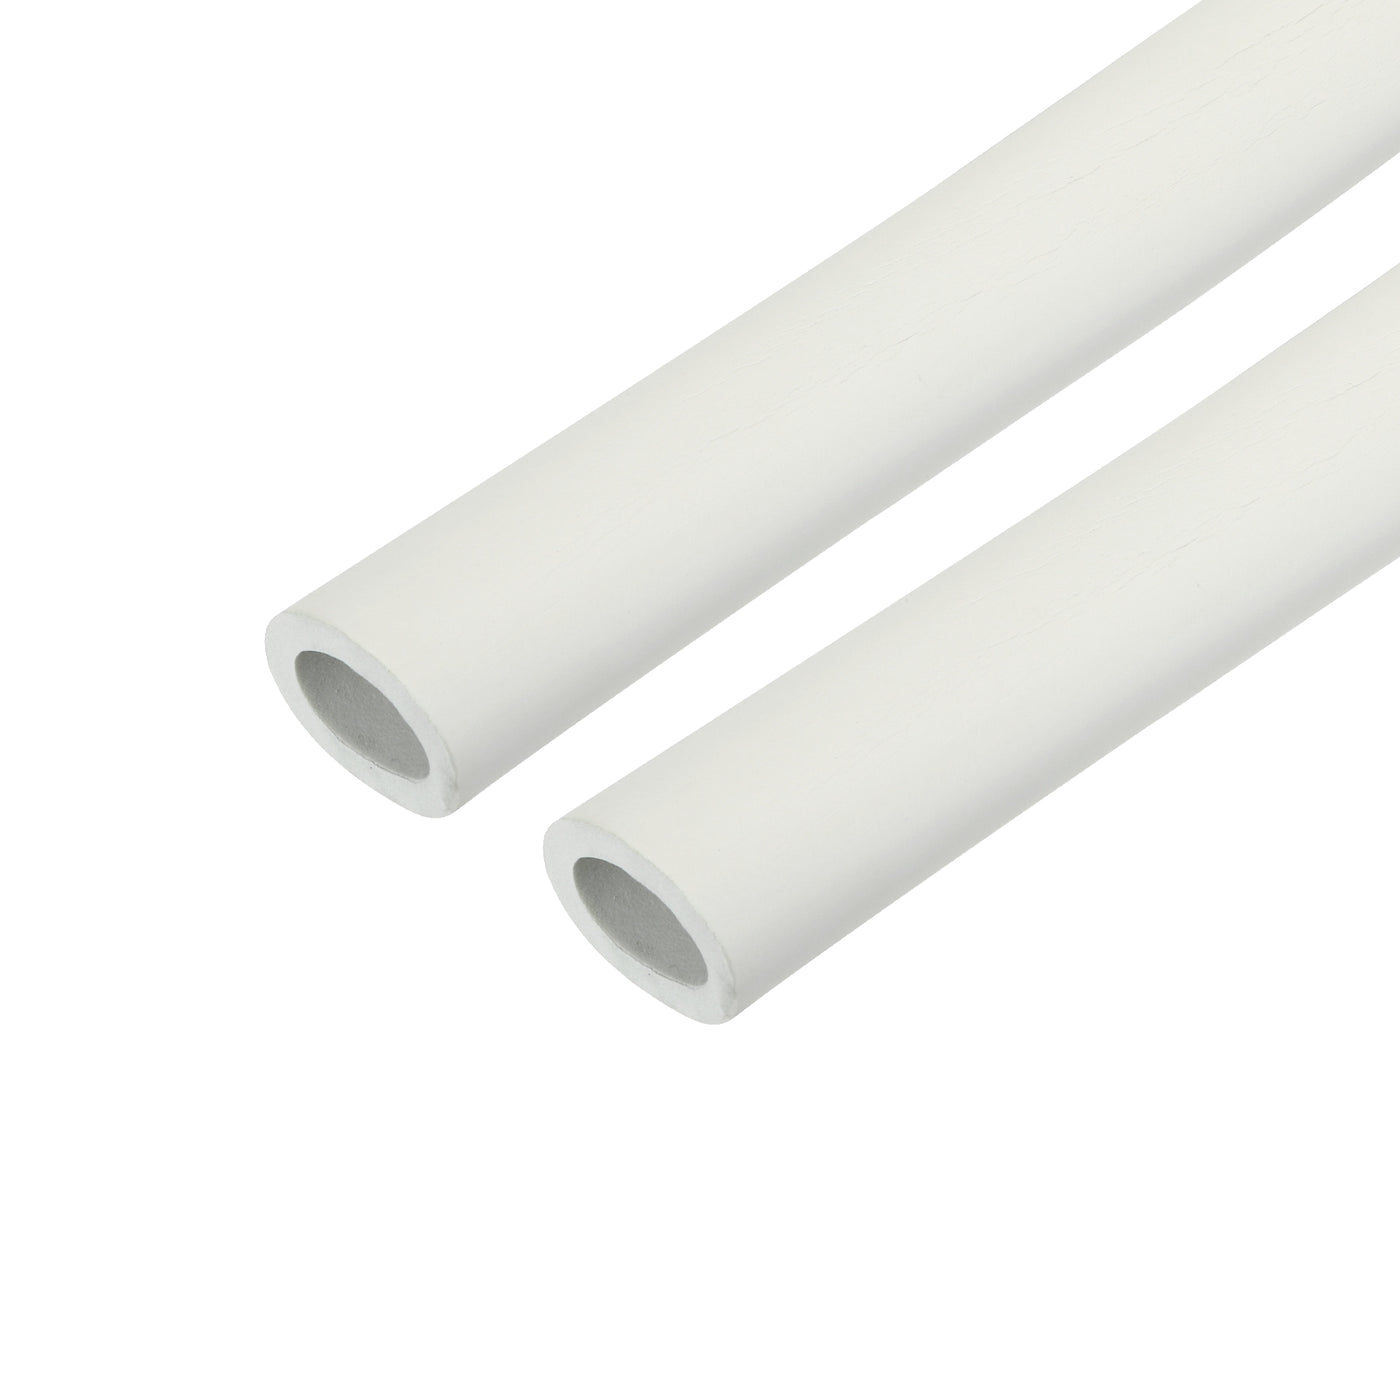 uxcell Uxcell 2pcs 3.3ft Pipe Insulation Tube 7/8 Inch(22mm) ID 32mm OD Foam Tubing for Handle Grip Support, Beige